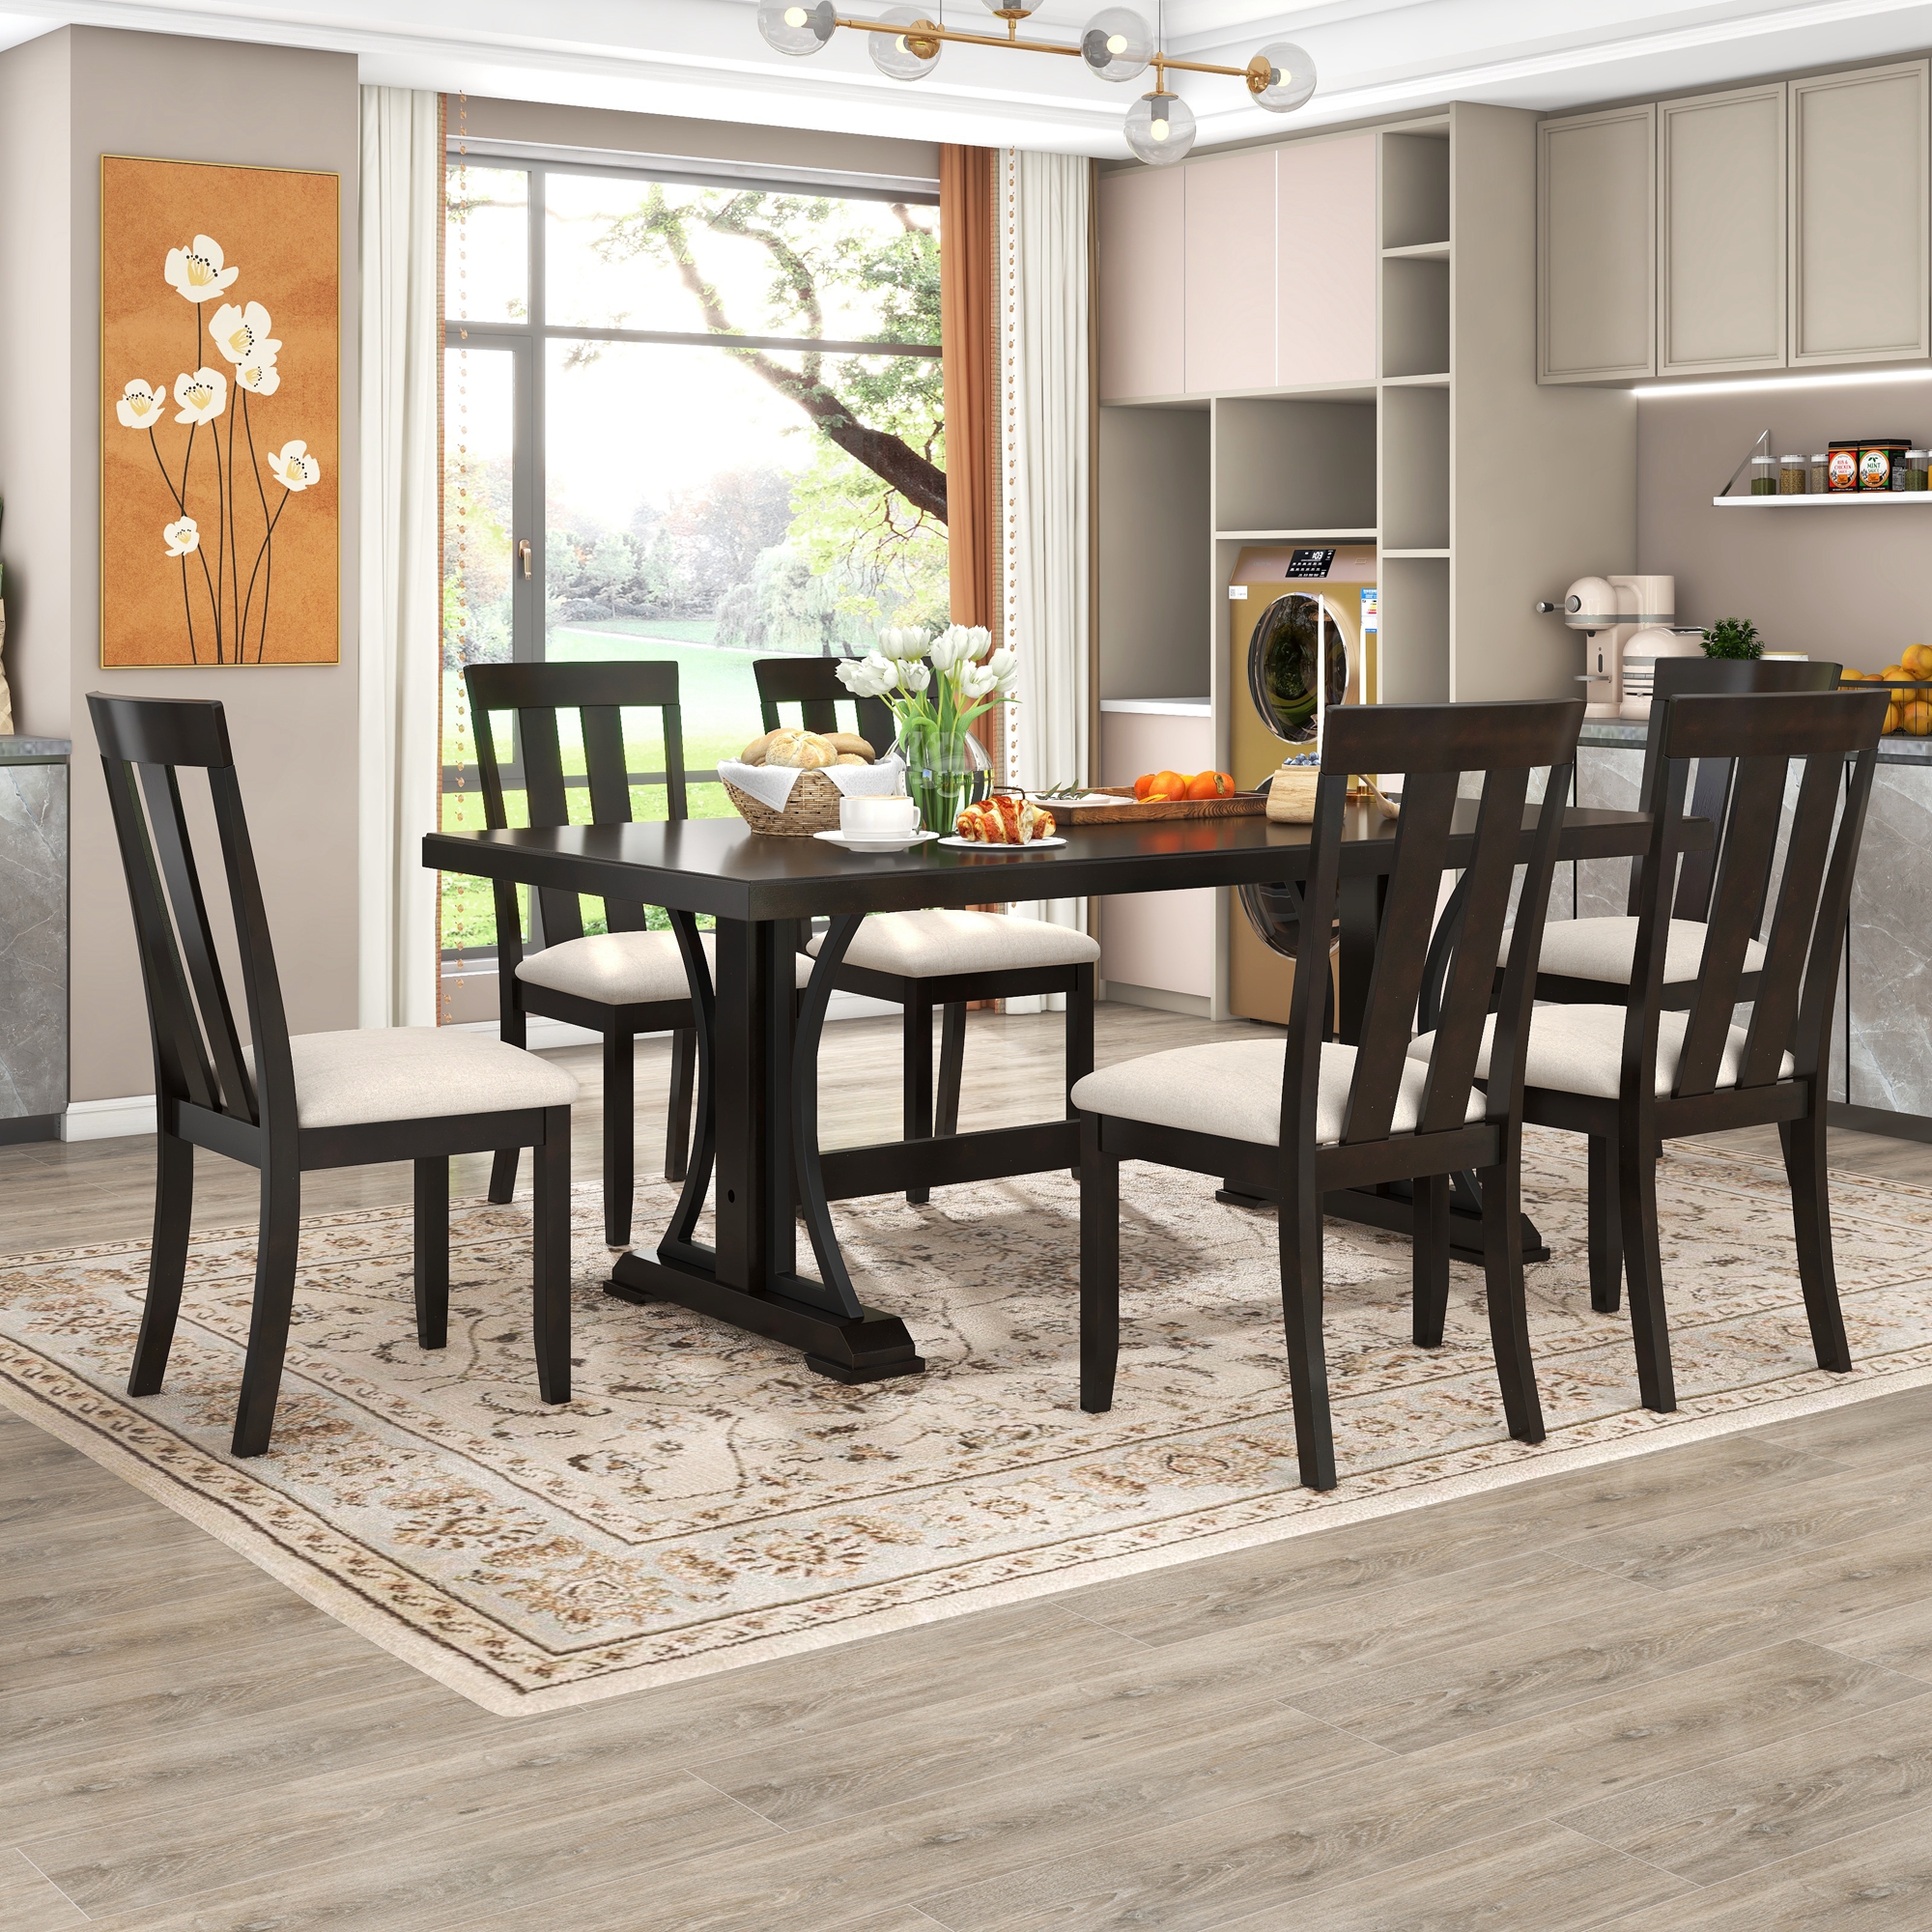 TREXM 7-Piece Retro Style Dining Table Set - ST000072AAP